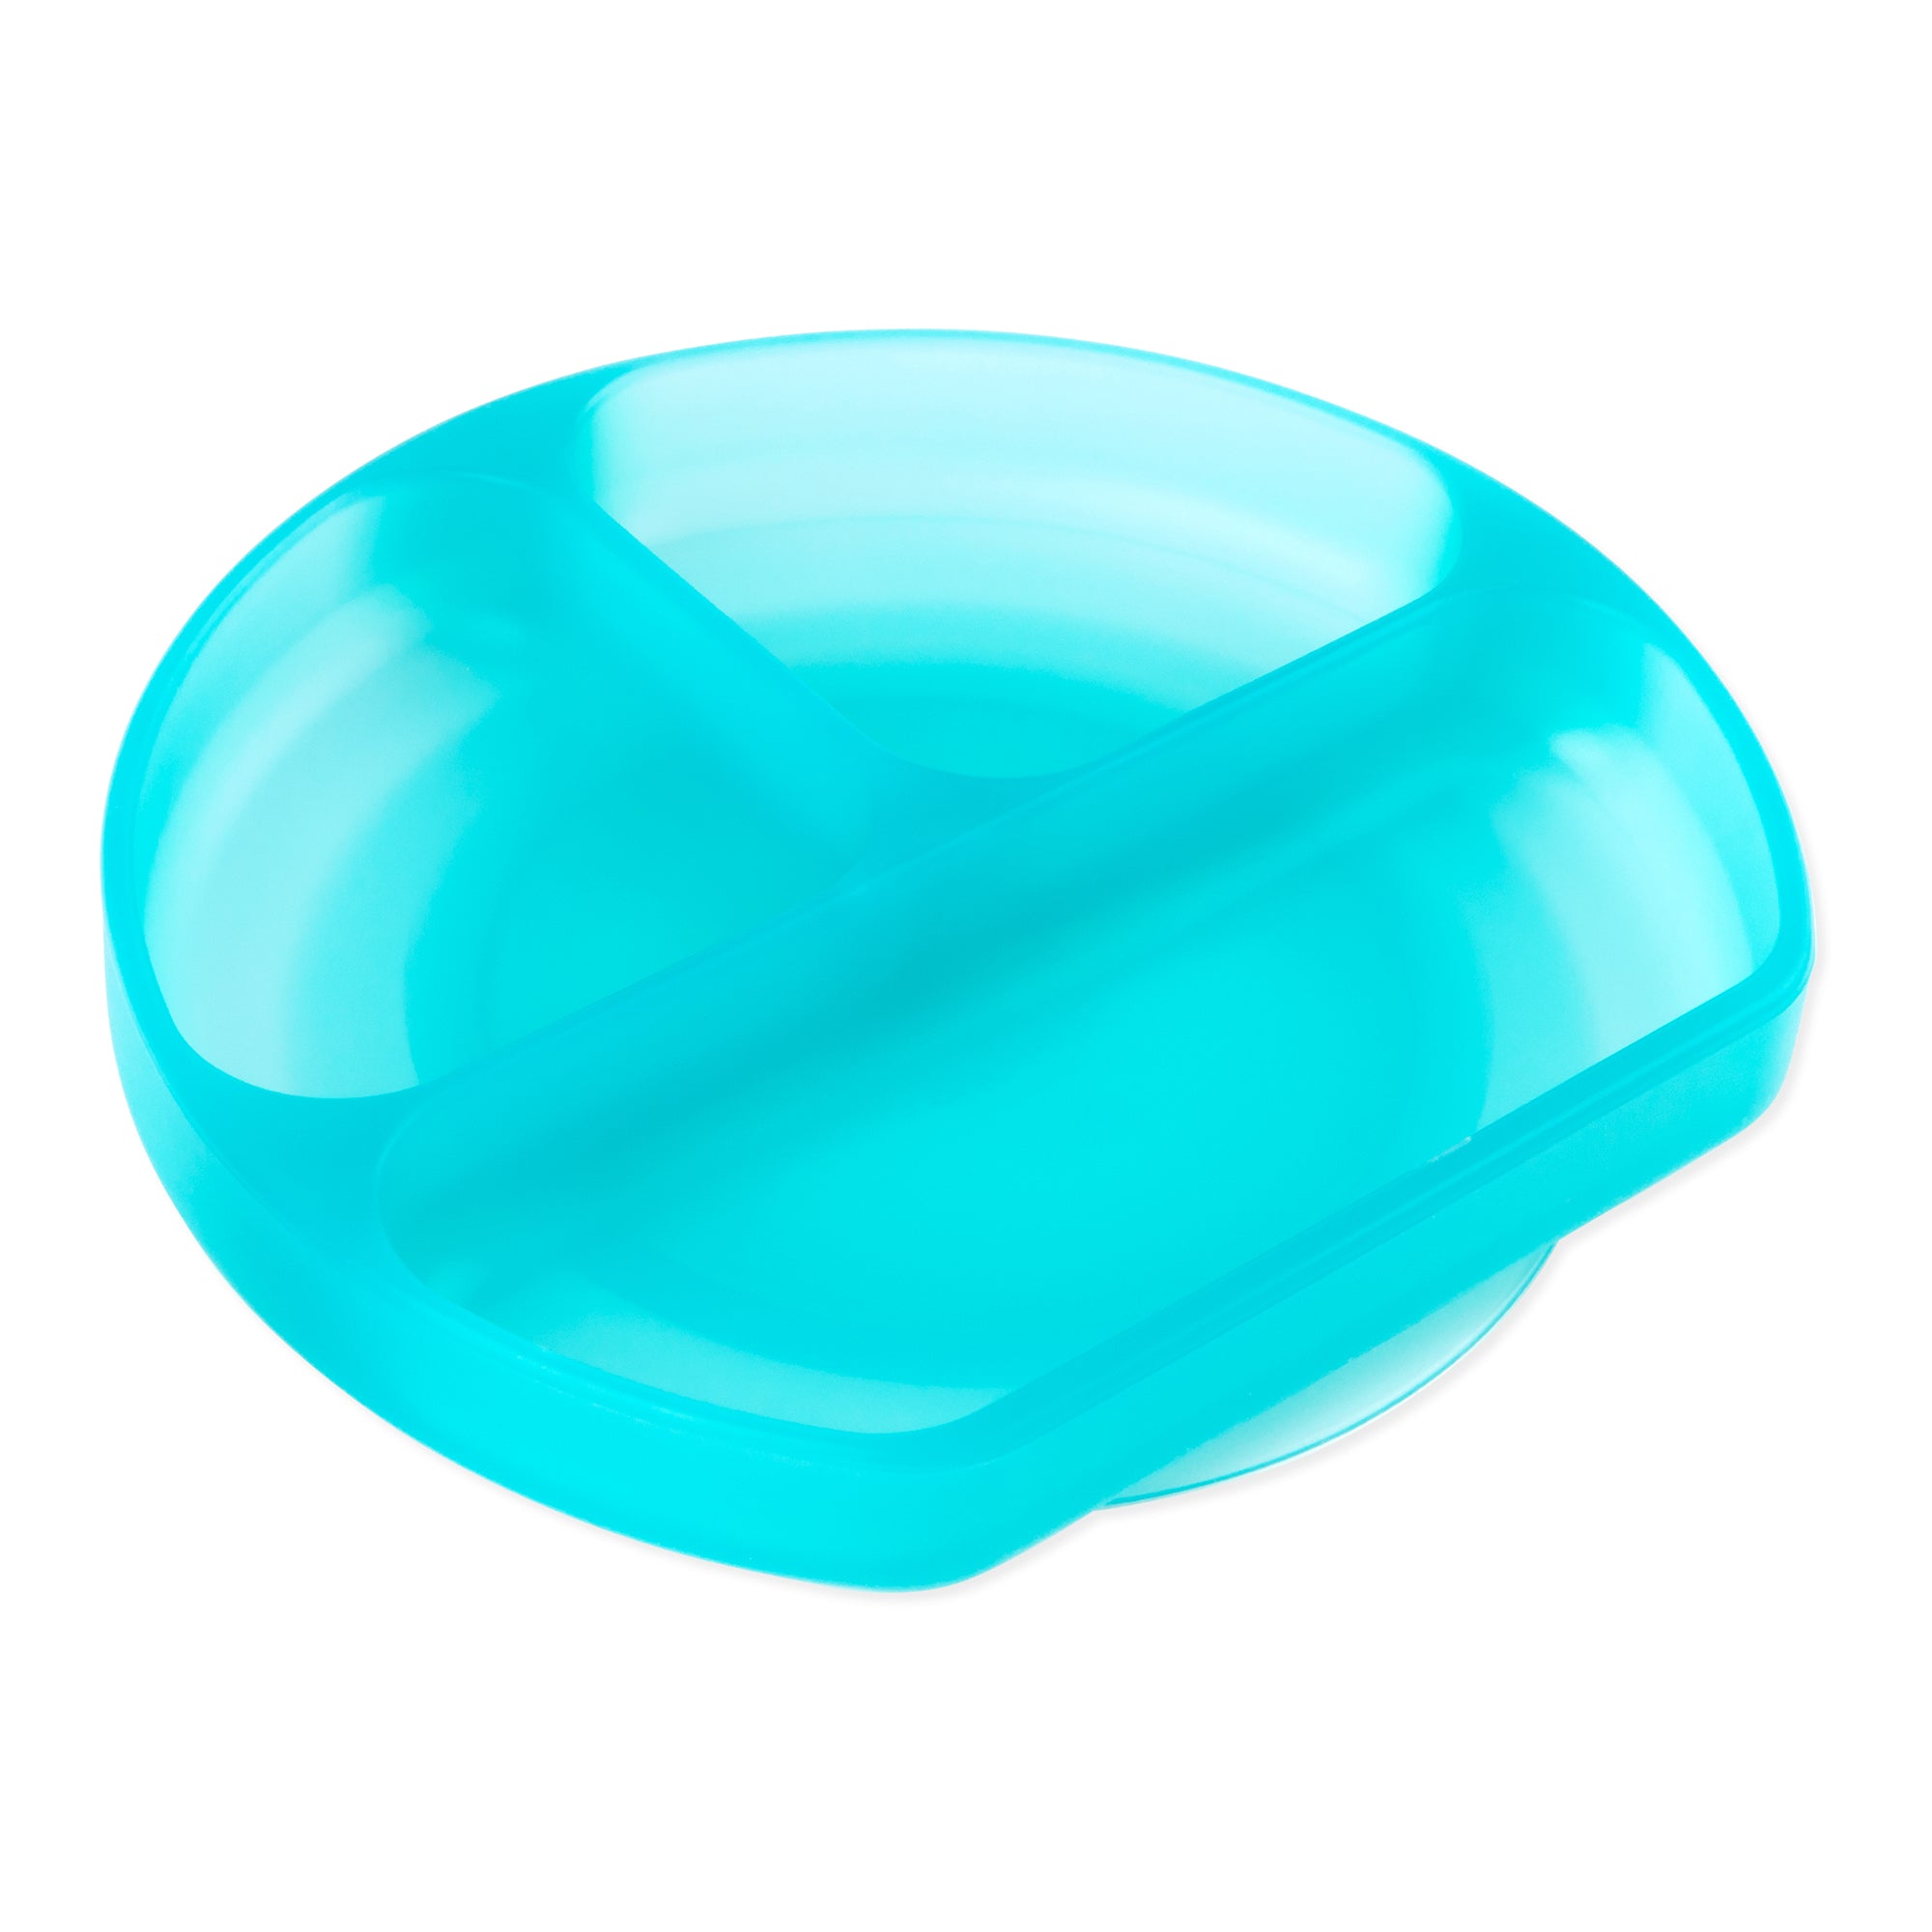 Silicone Grip Dish: Blue Jelly